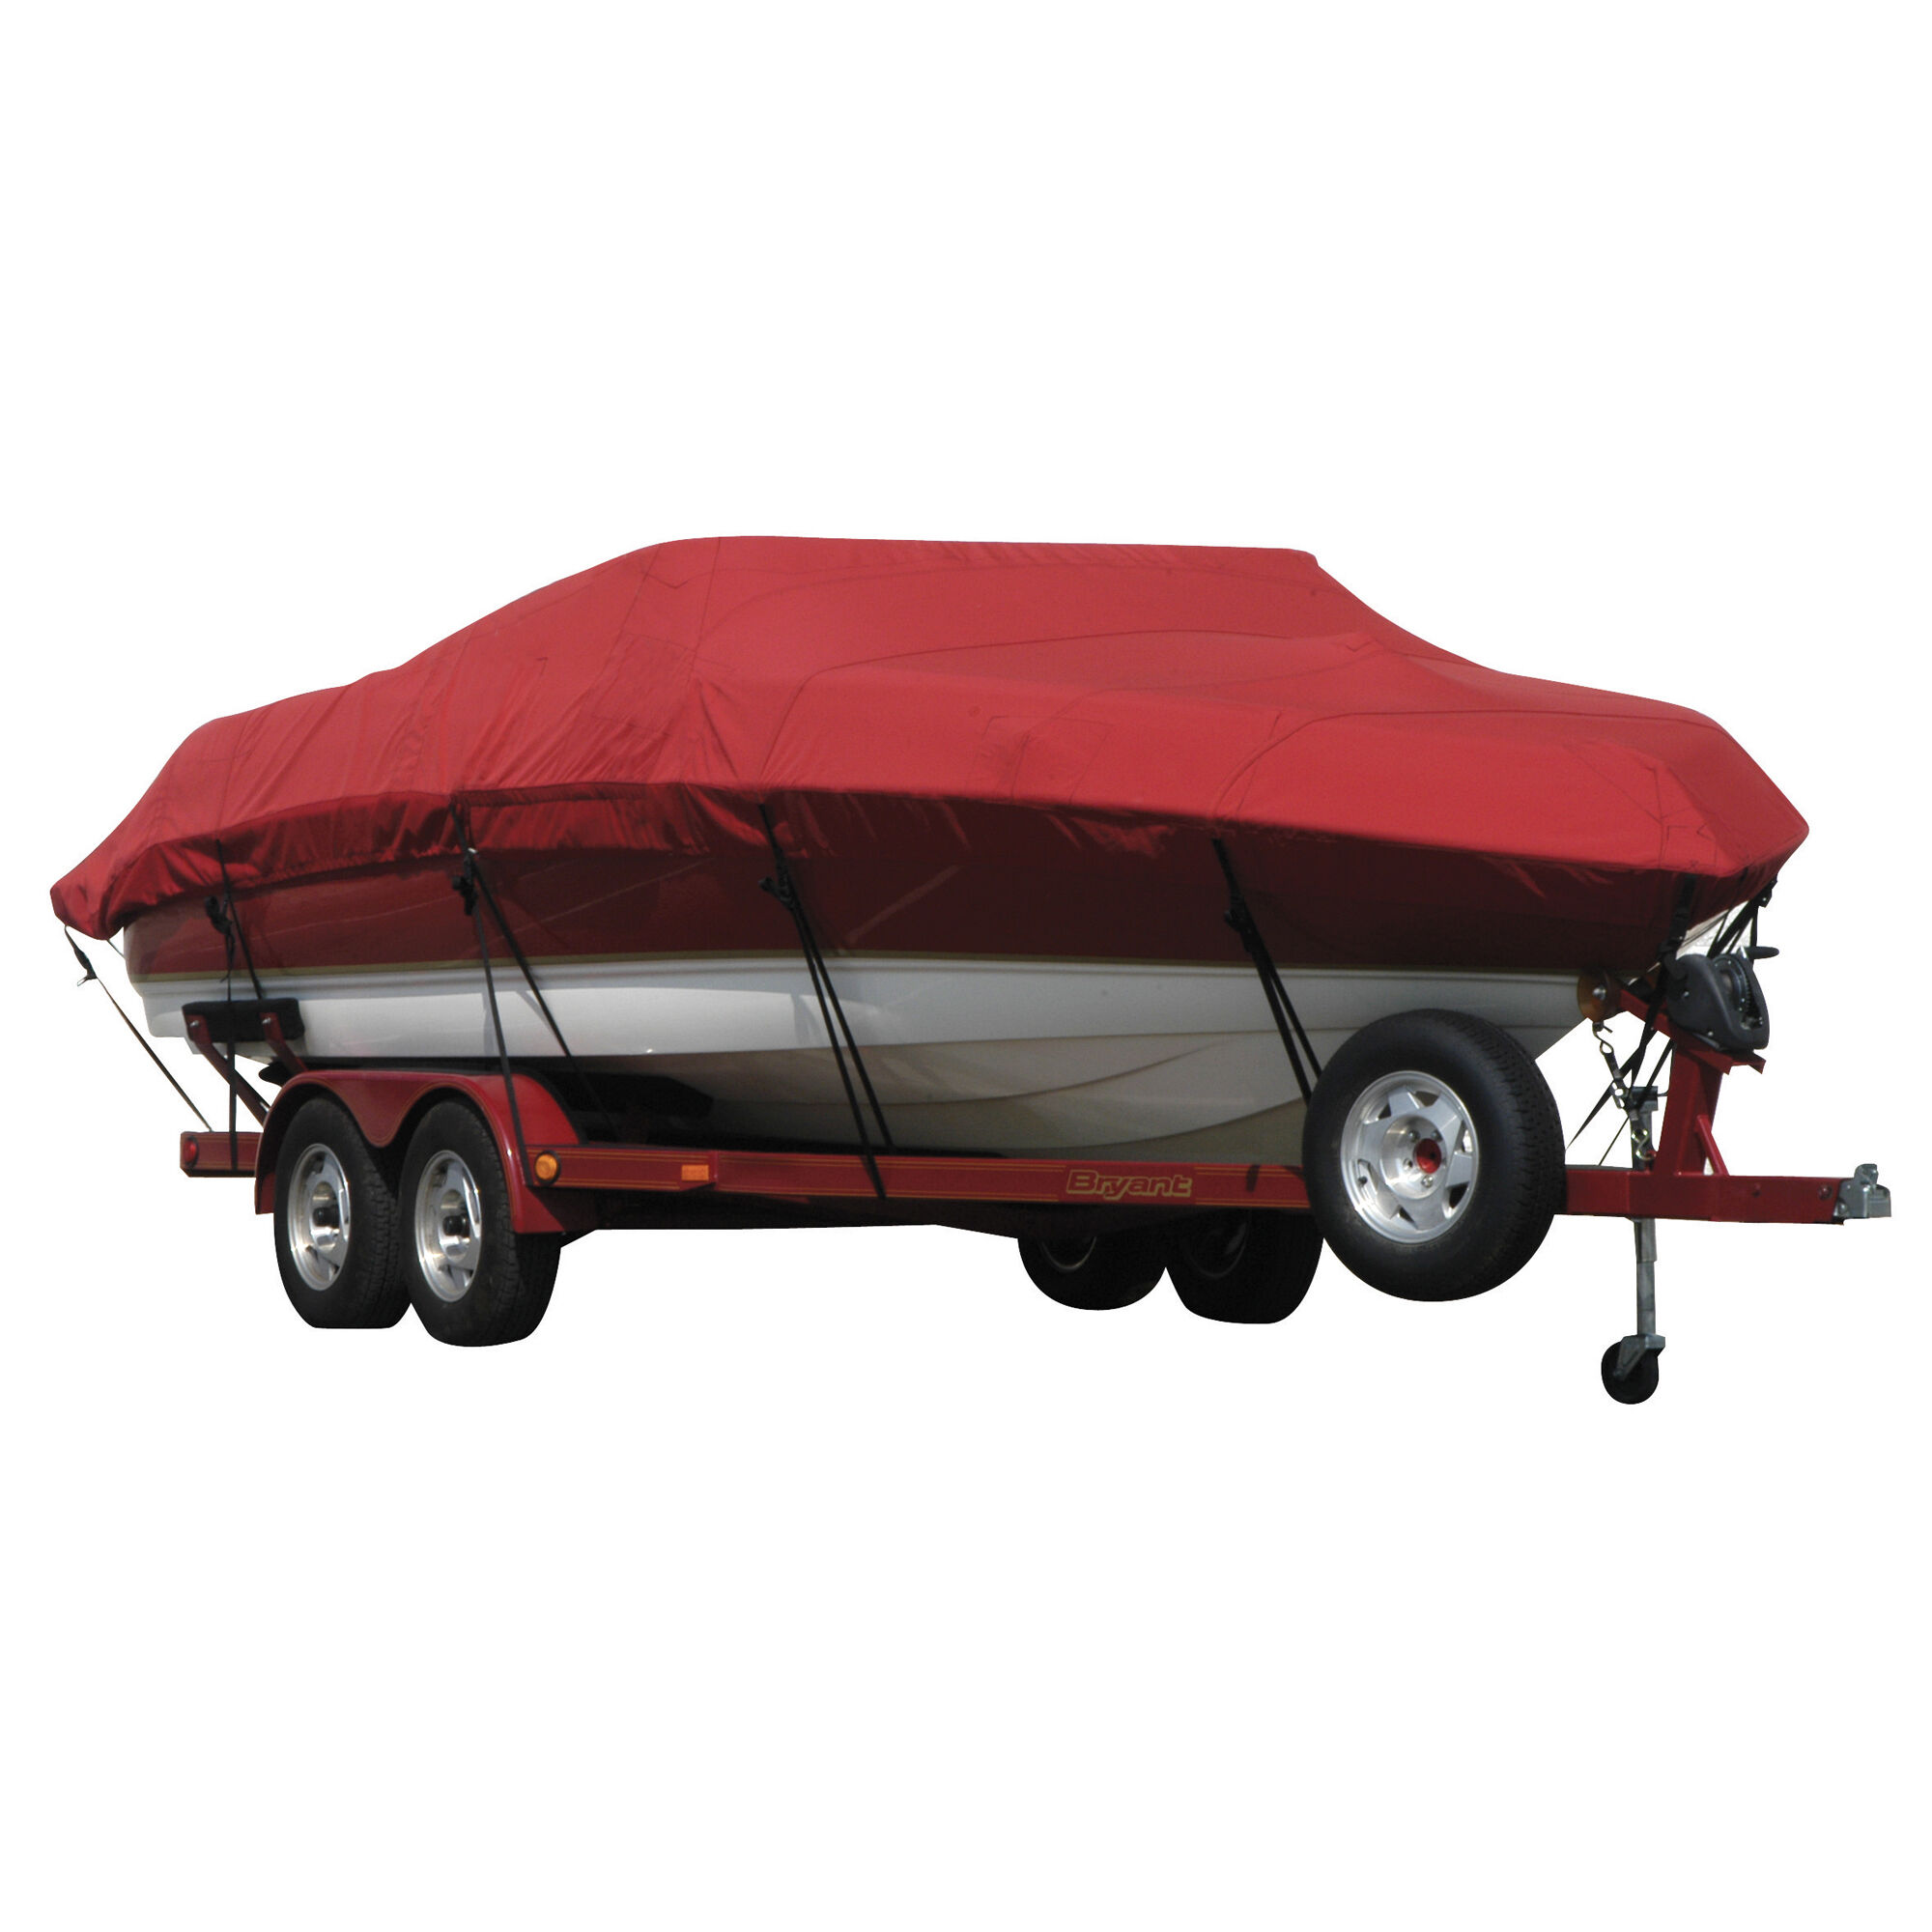 Covermate Exact Fit Sunbrella Boat Cover for Lund 1790 Pro Bass 1790 Pro Bass w/ Starboard Trolling Motor O/B. Red